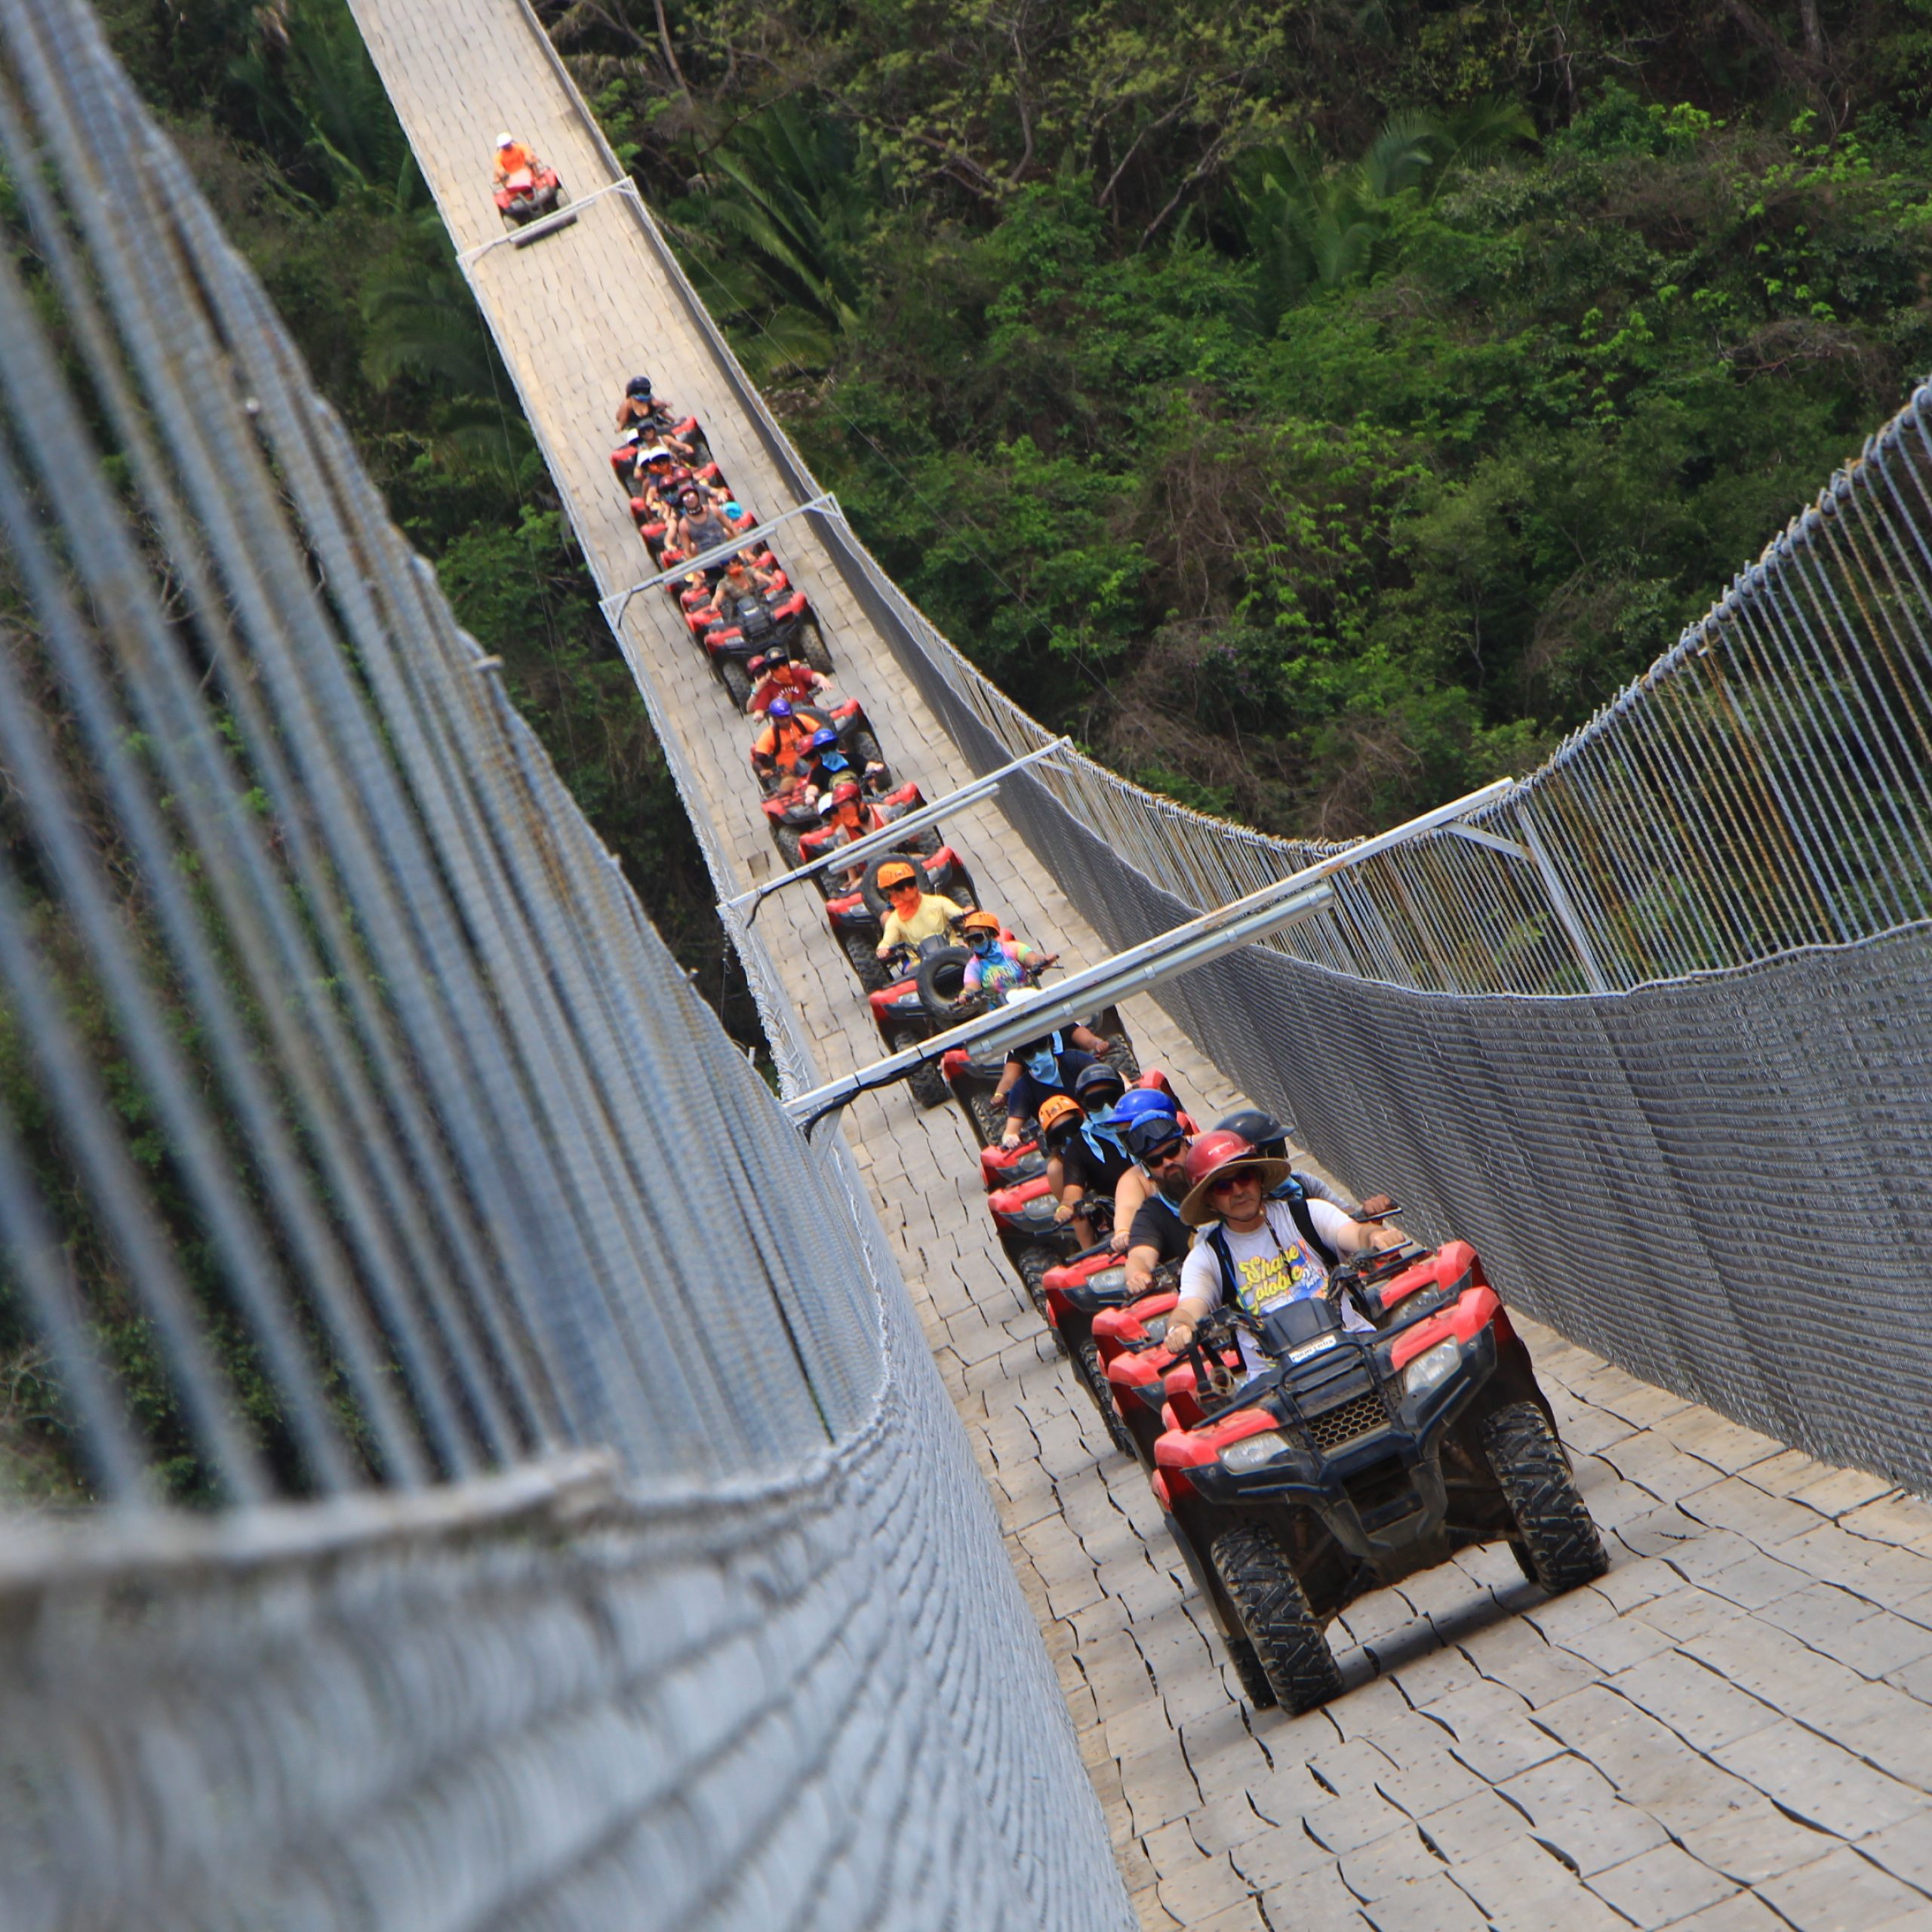 Now you are driving your ATV and crossing the longest suspension traffic bridge of the world